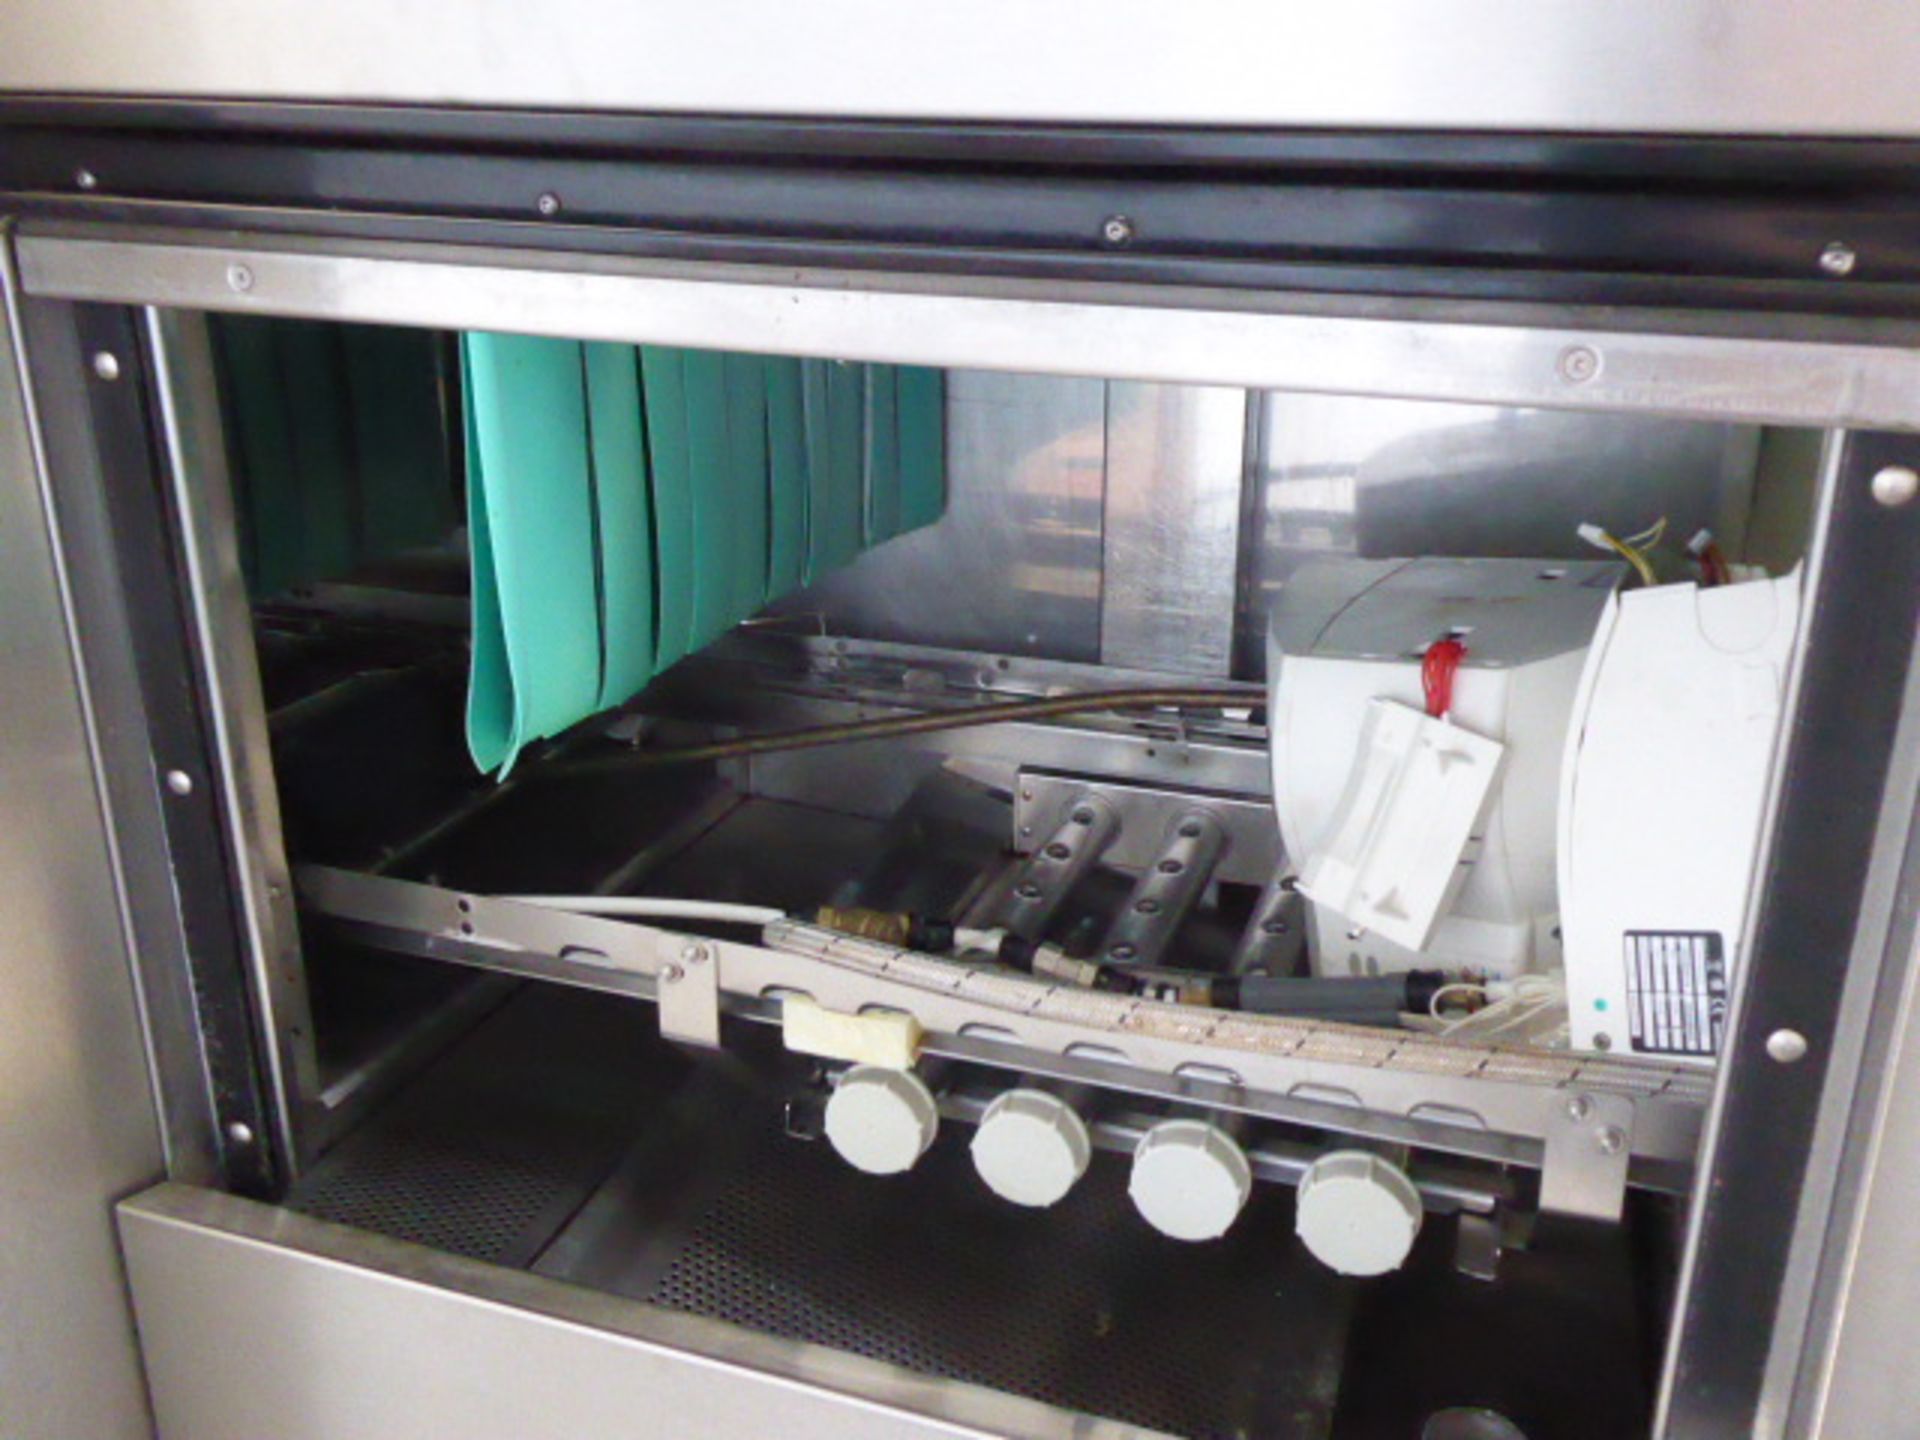 Meiko model K200 fight deck commercial pass through dishwasher with associated waste disposal unit - Image 3 of 6